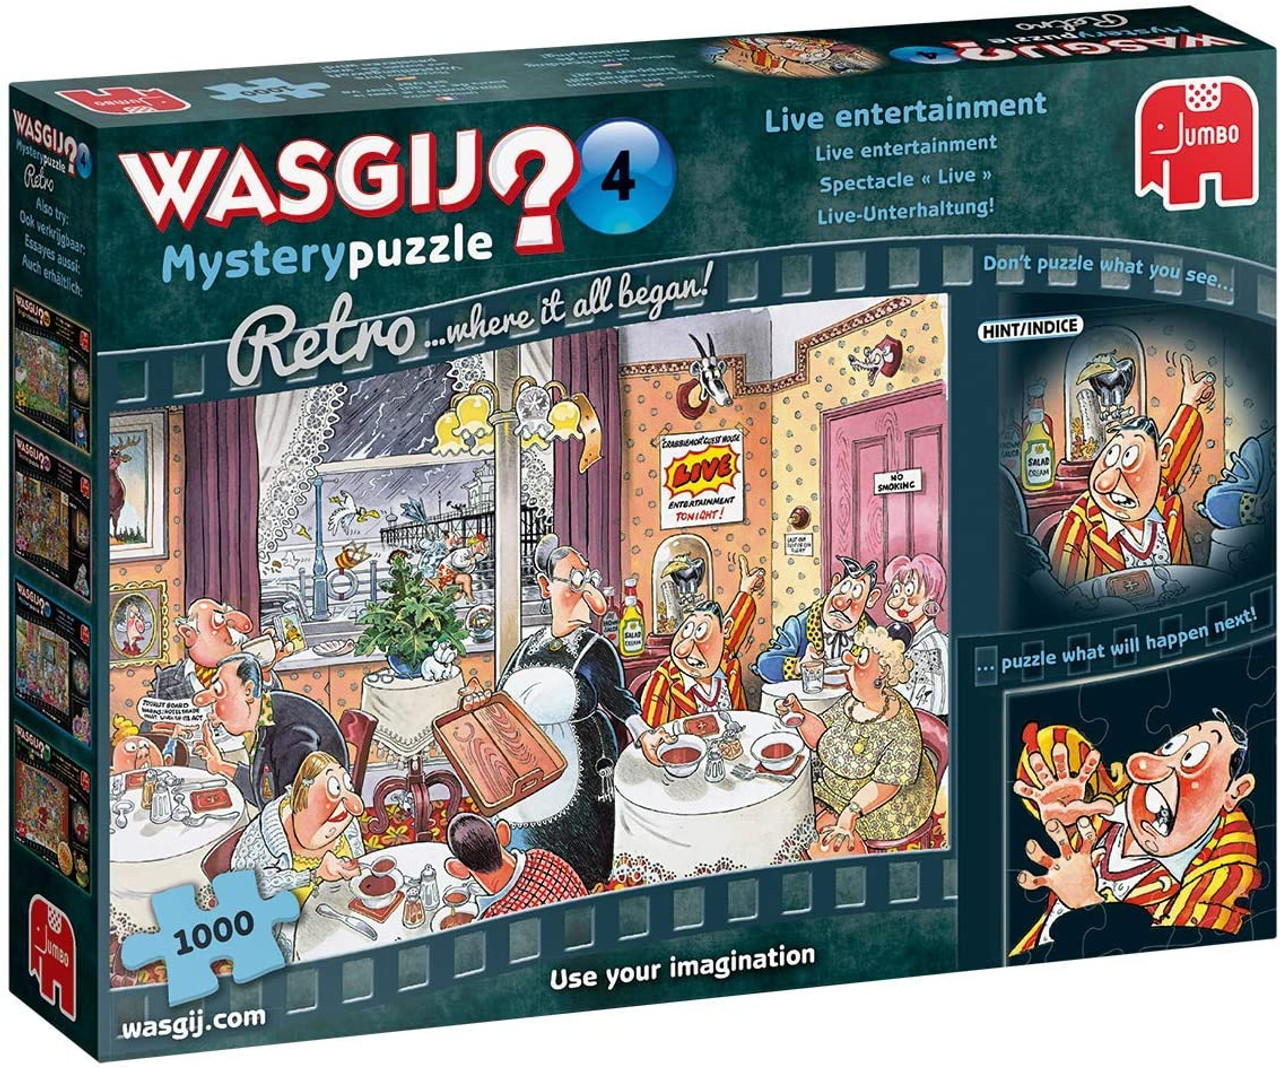 Onleesbaar Iedereen Festival Retro Live Entertainment" JVH *WASGIJ Mystery #4* 1000 Piece Jigsaw Puzzle  | Jumbo - Tri-M Specialty Products